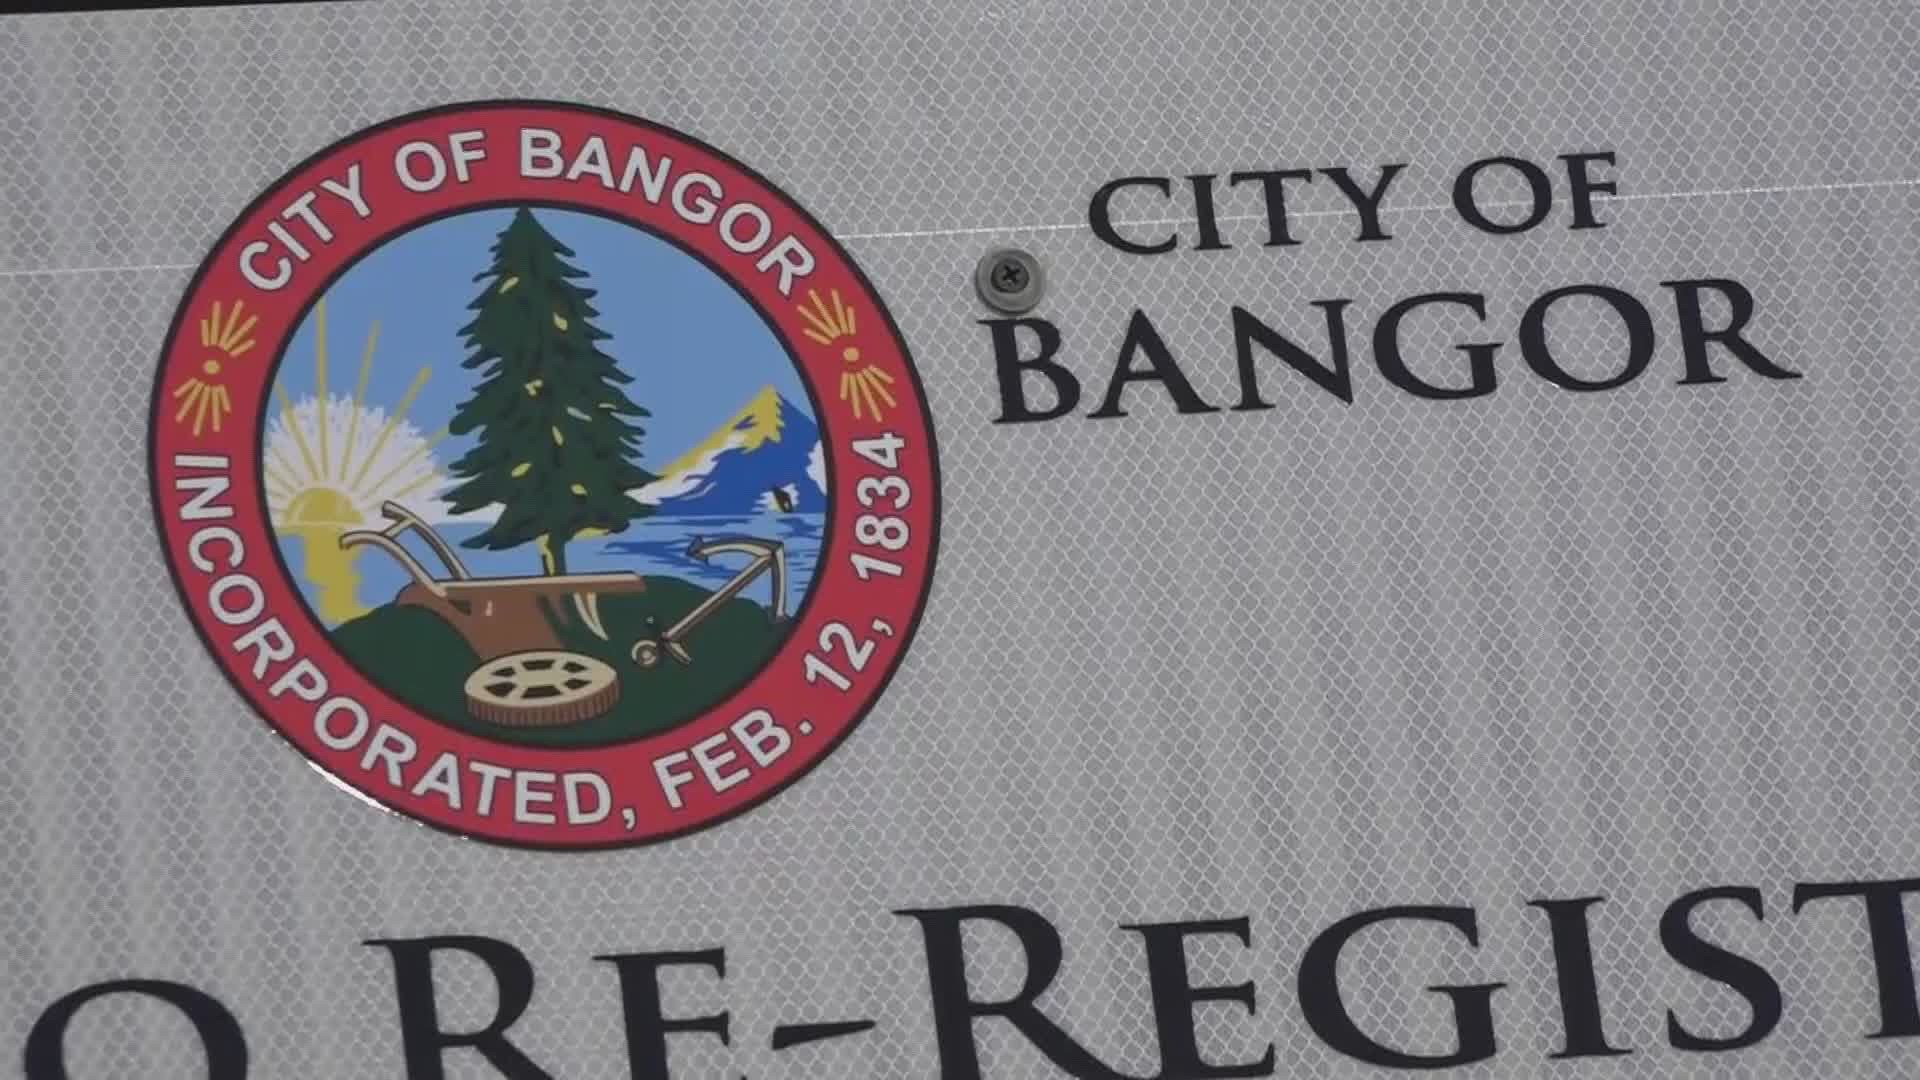 The group will provide input to the city of Bangor on issues of policy, as well as working to build a more diverse workforce and accepting community.